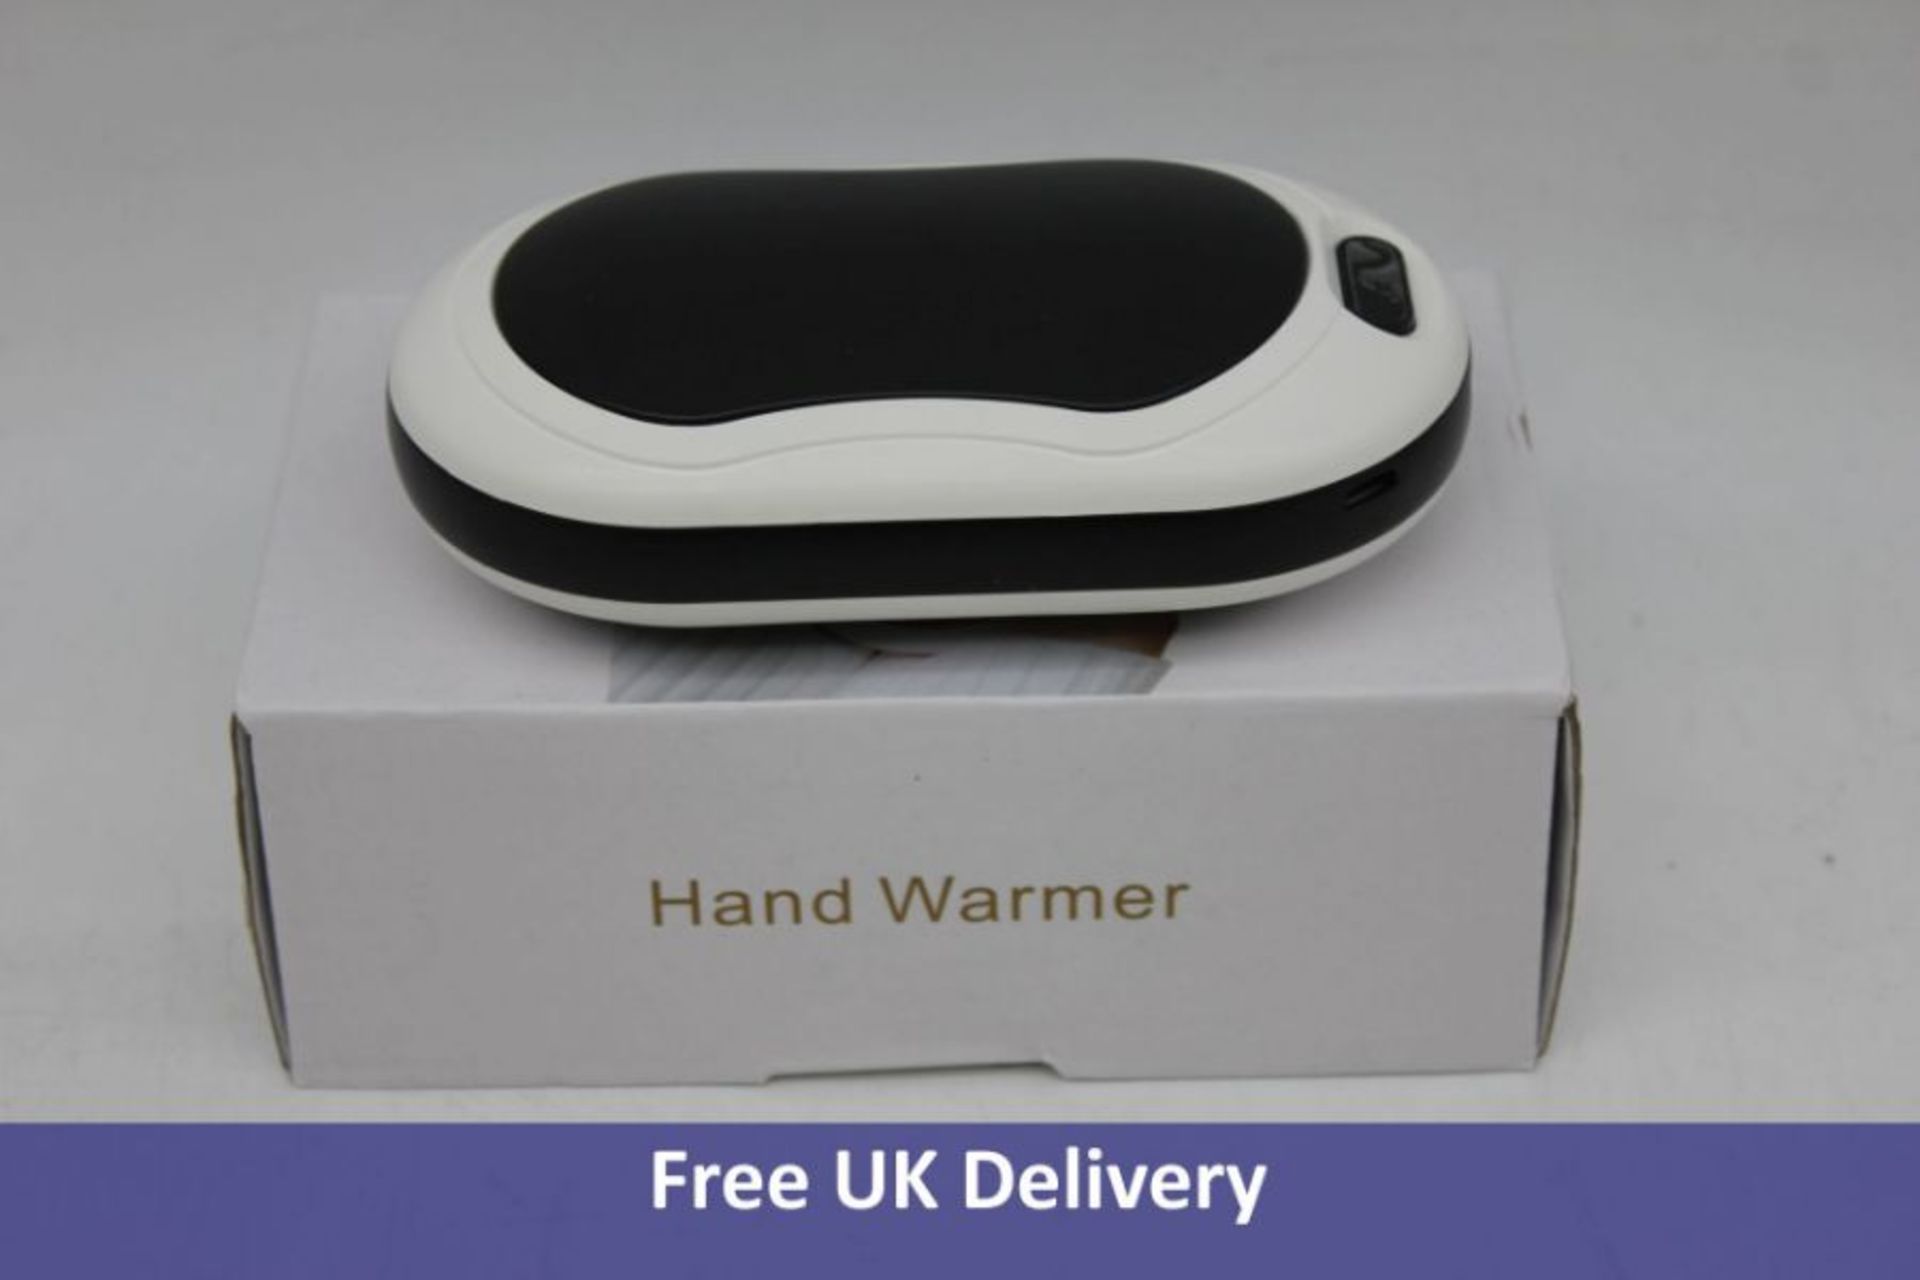 Ten Hand Warmer LC-C300 Rechargeable Hand Warmer, 10000mAh, Black. Boxes damaged - Image 2 of 2